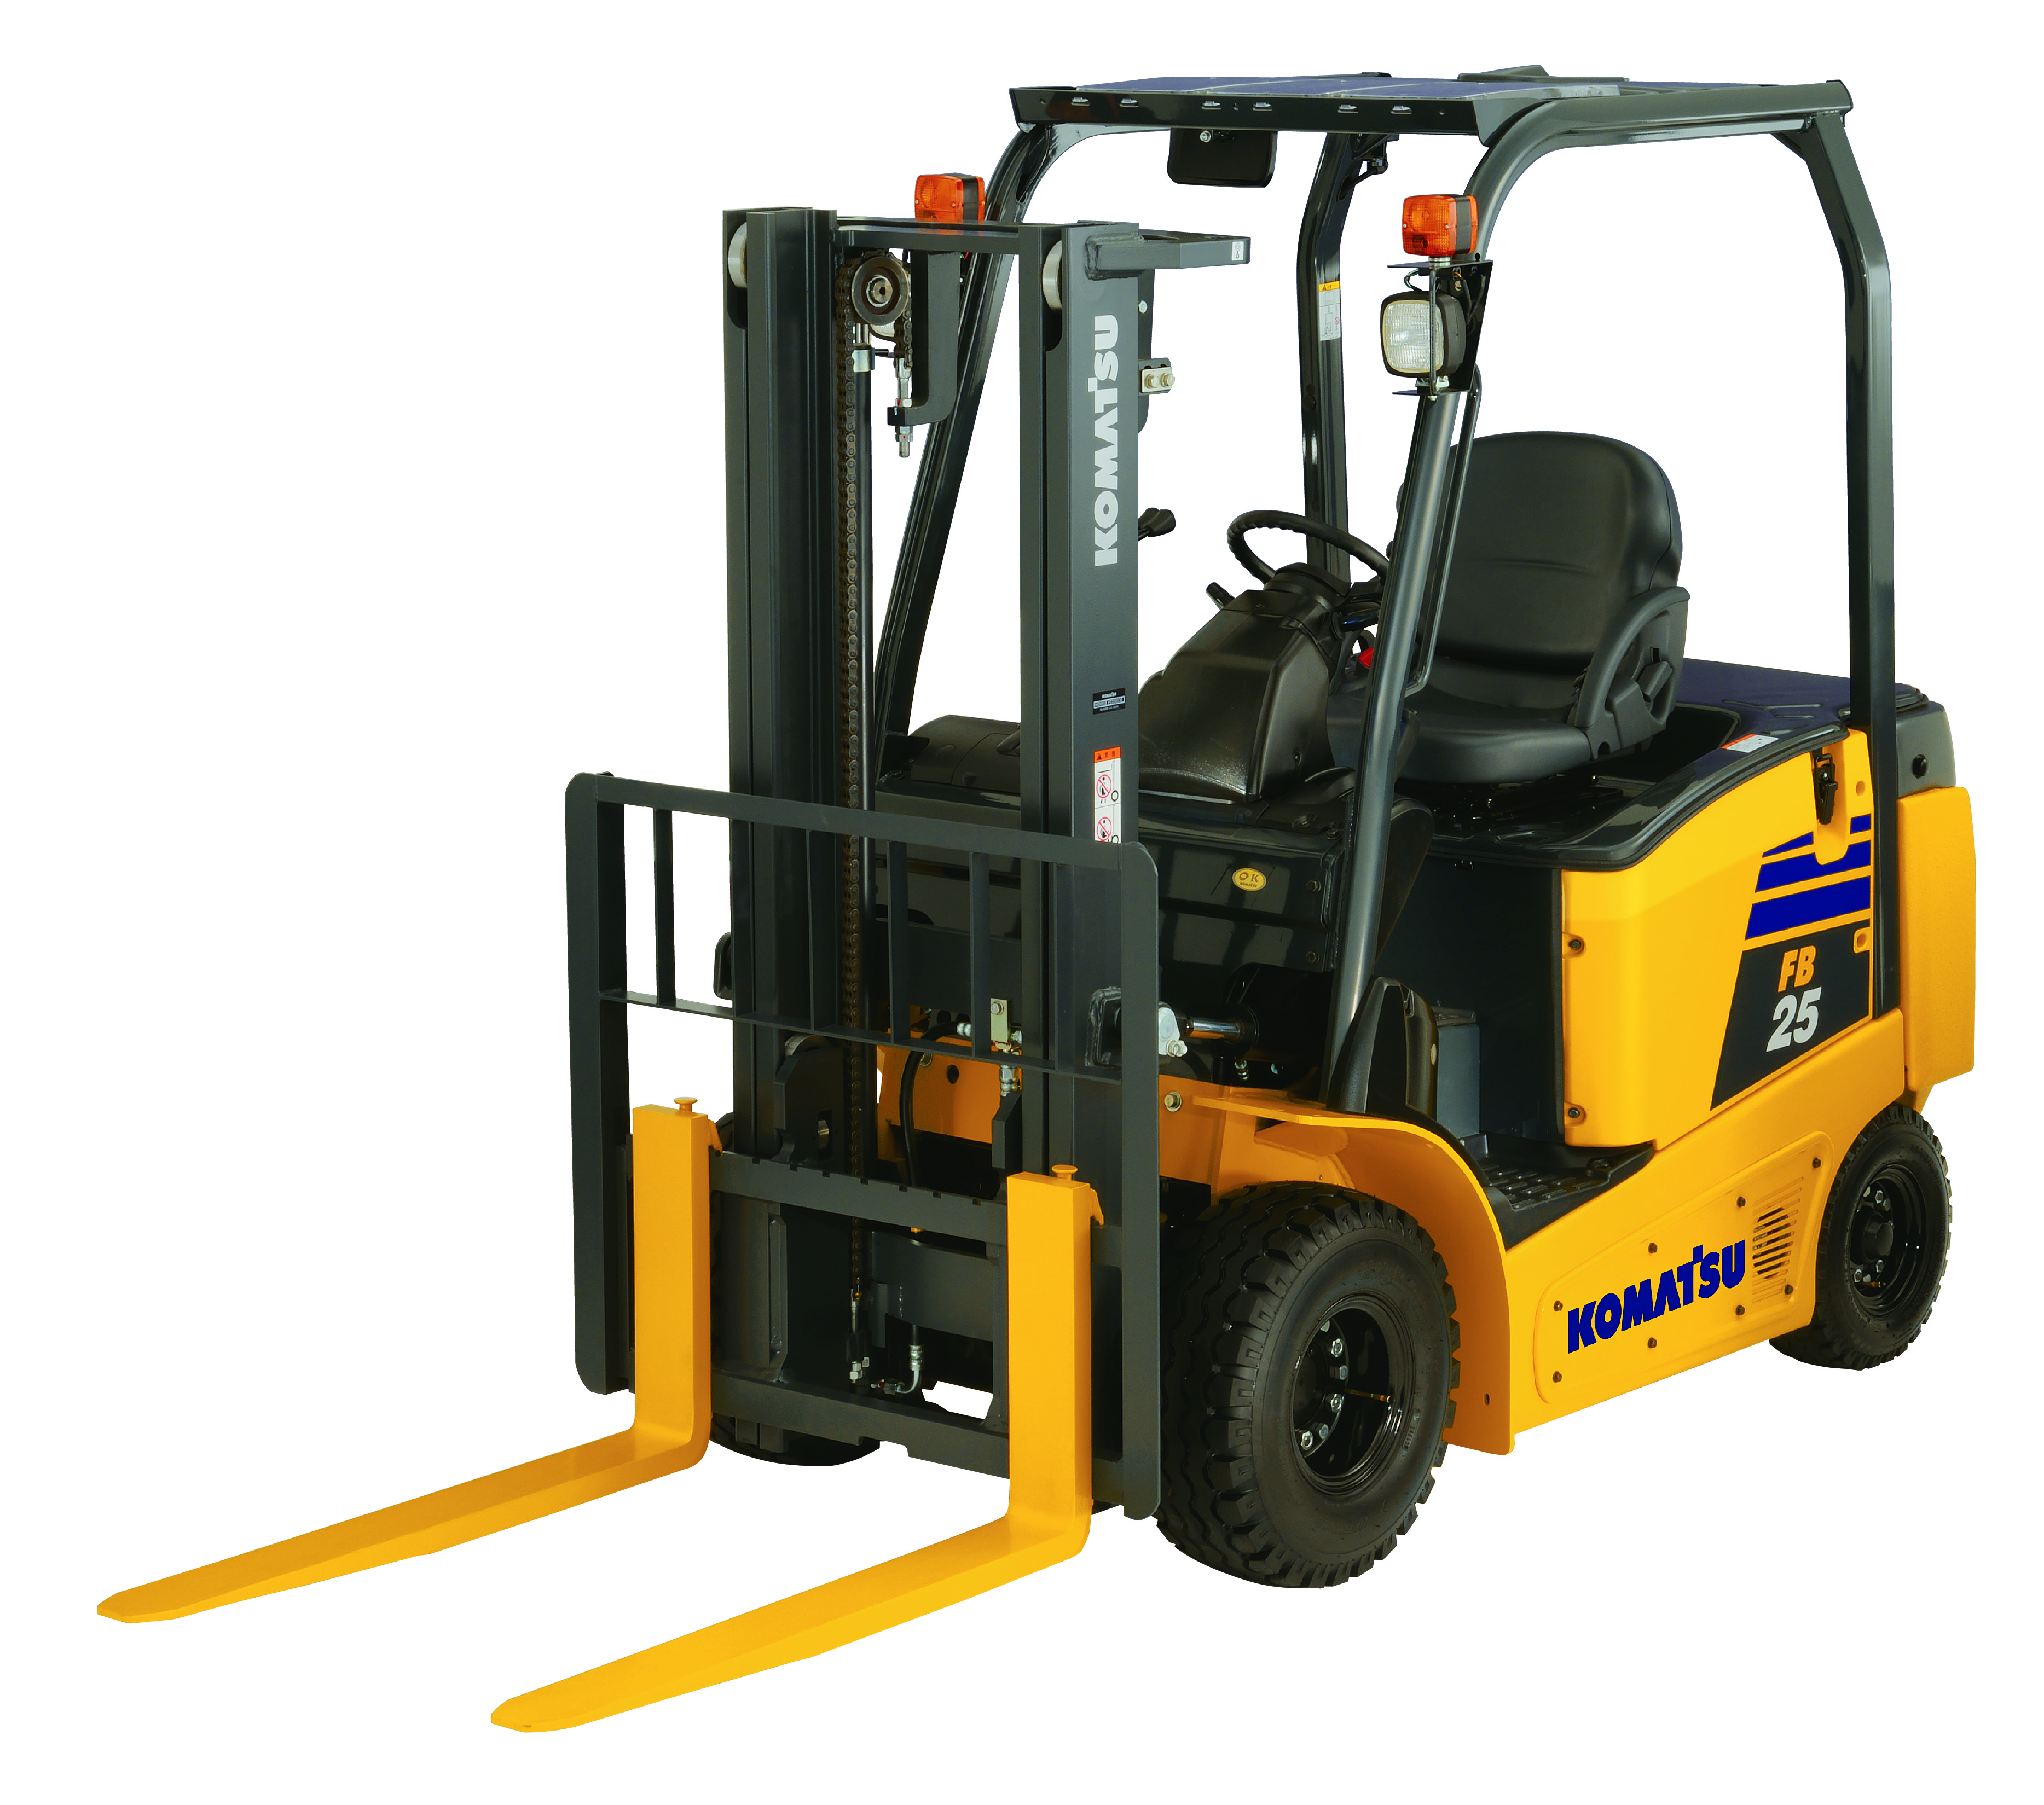 Forklifts: Komatsu FB Series - 2.5 to 3.0 Tonne Capacity Battery Electric Forklift